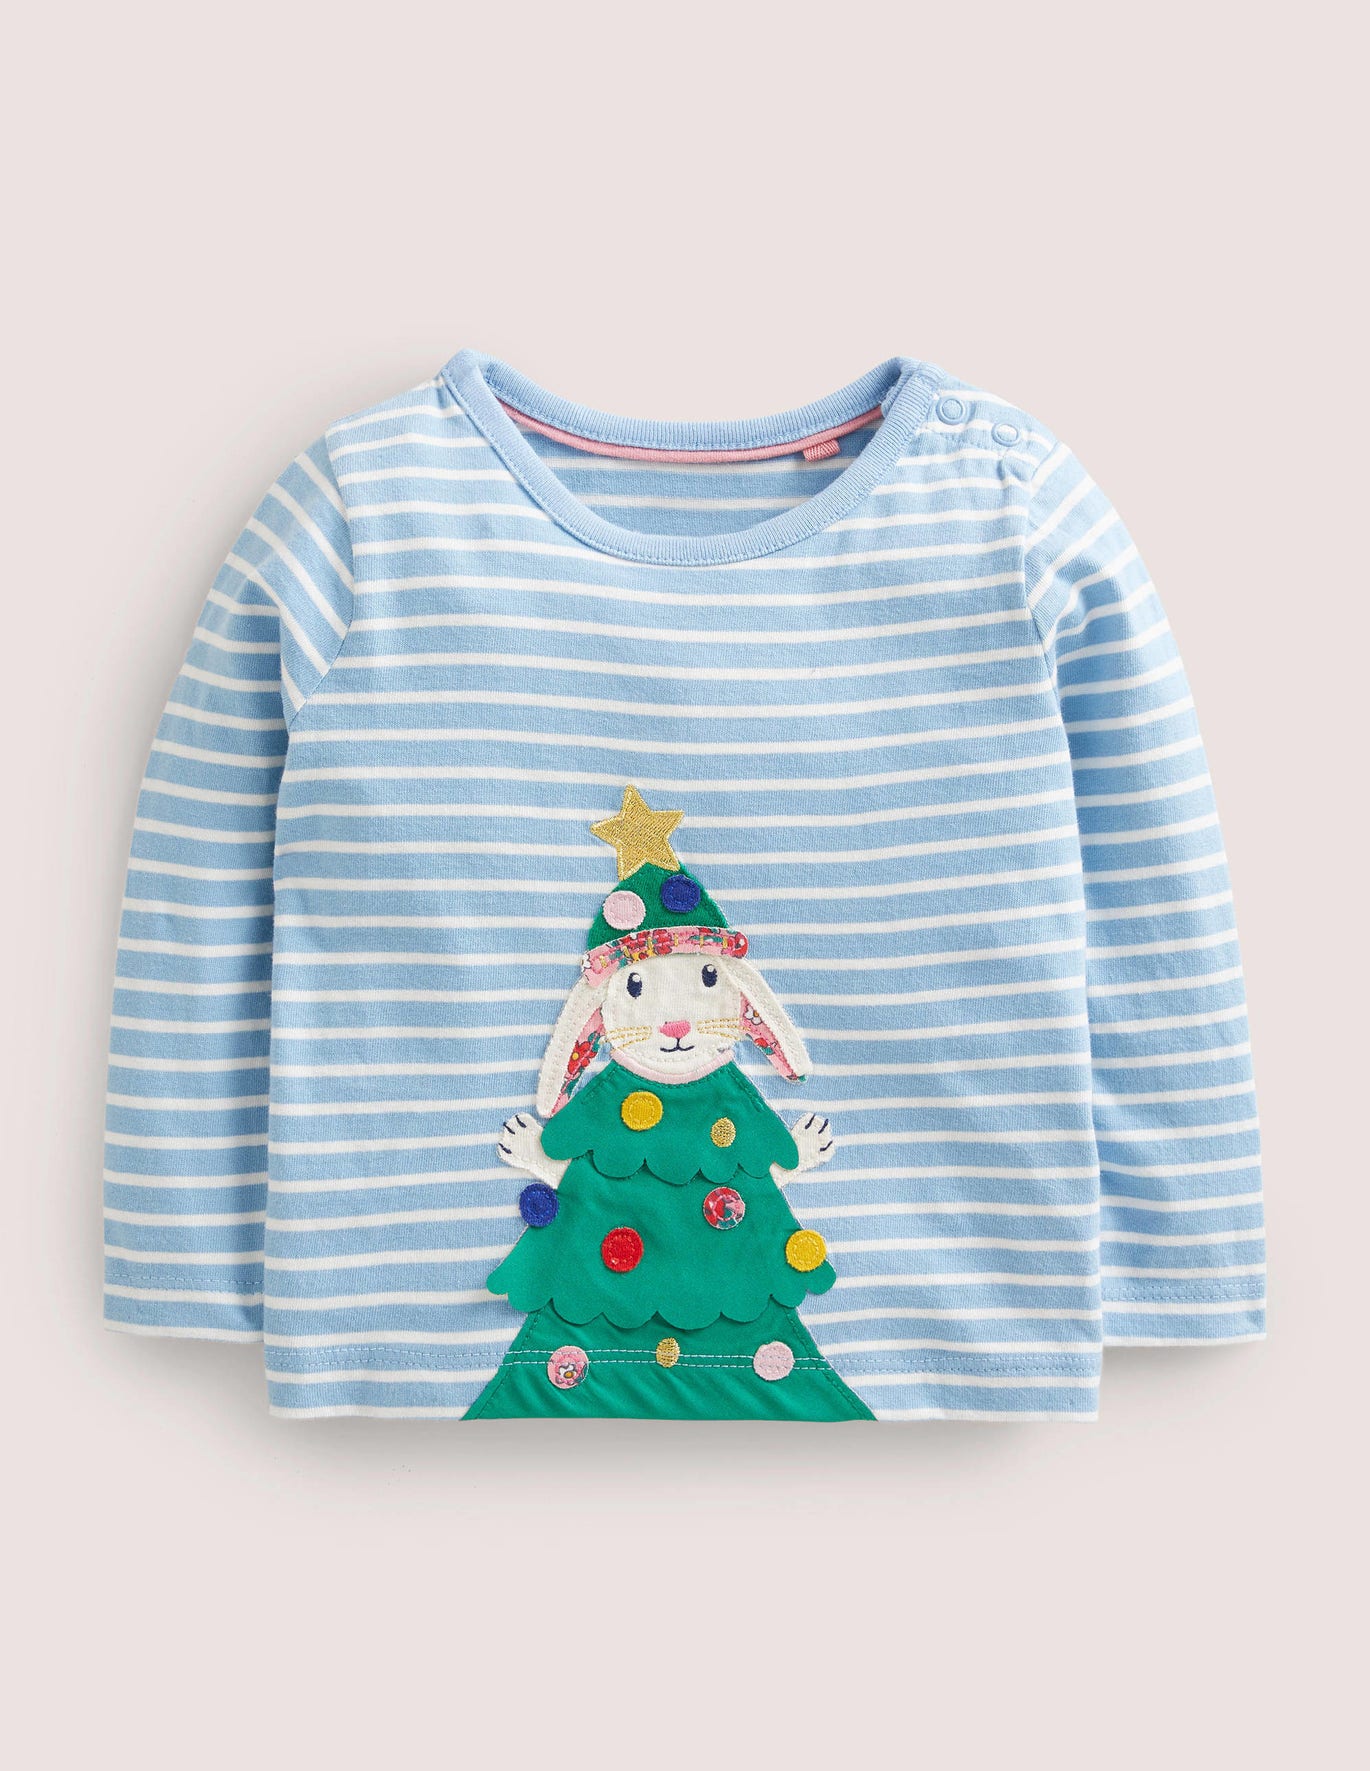 Boden Applique Christmas T-shirt - Dusty Blue/Ivory Bunny